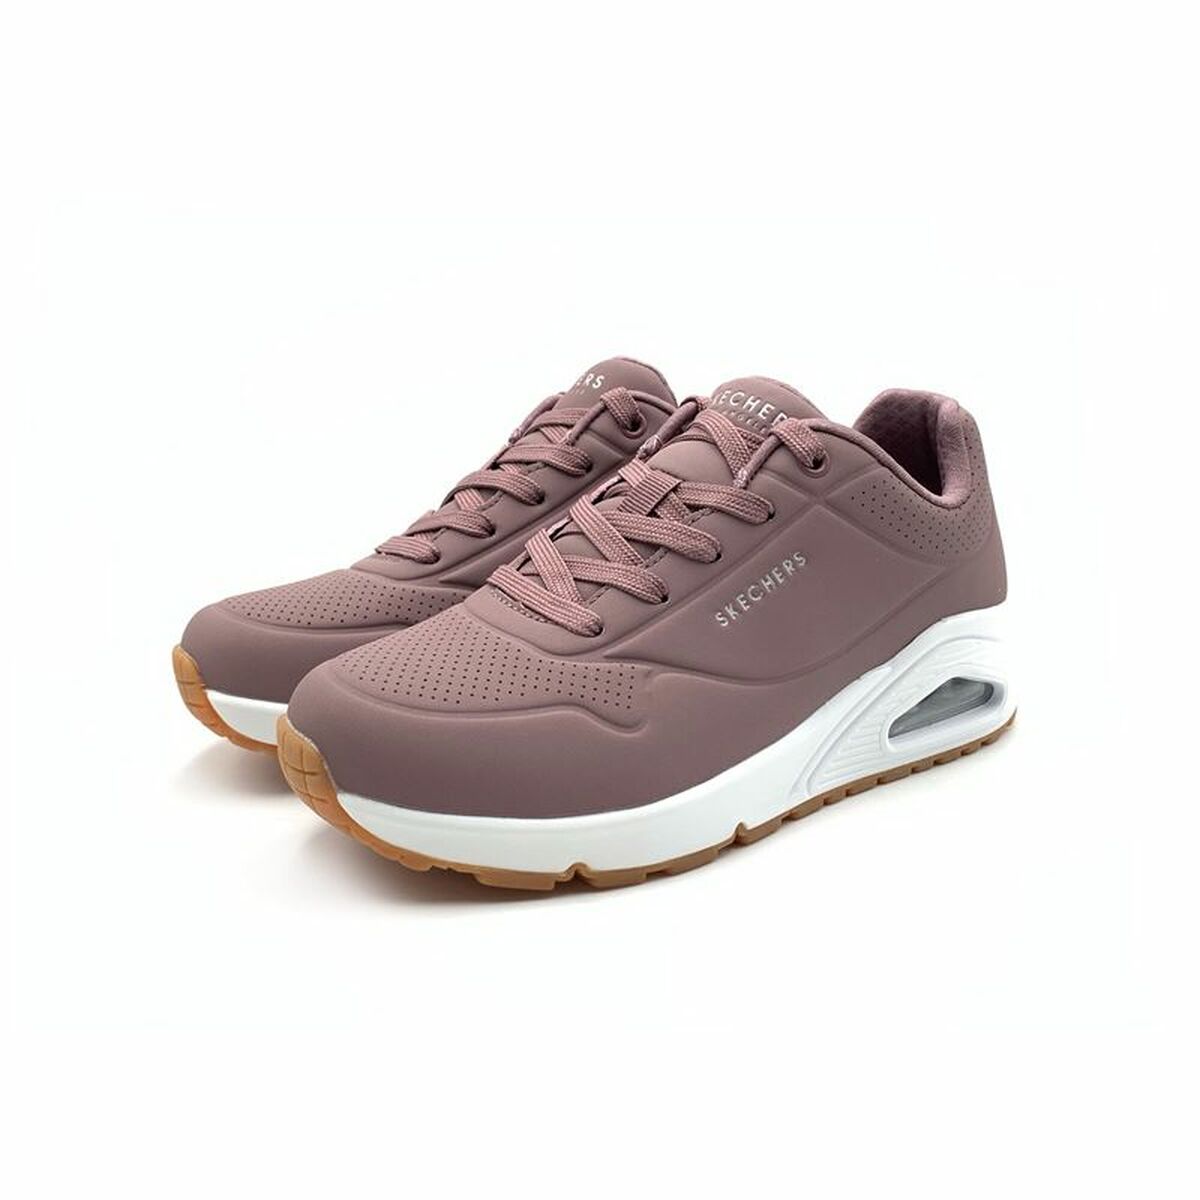 Sports Trainers for Women Skechers One Stand on Air Malva Plum